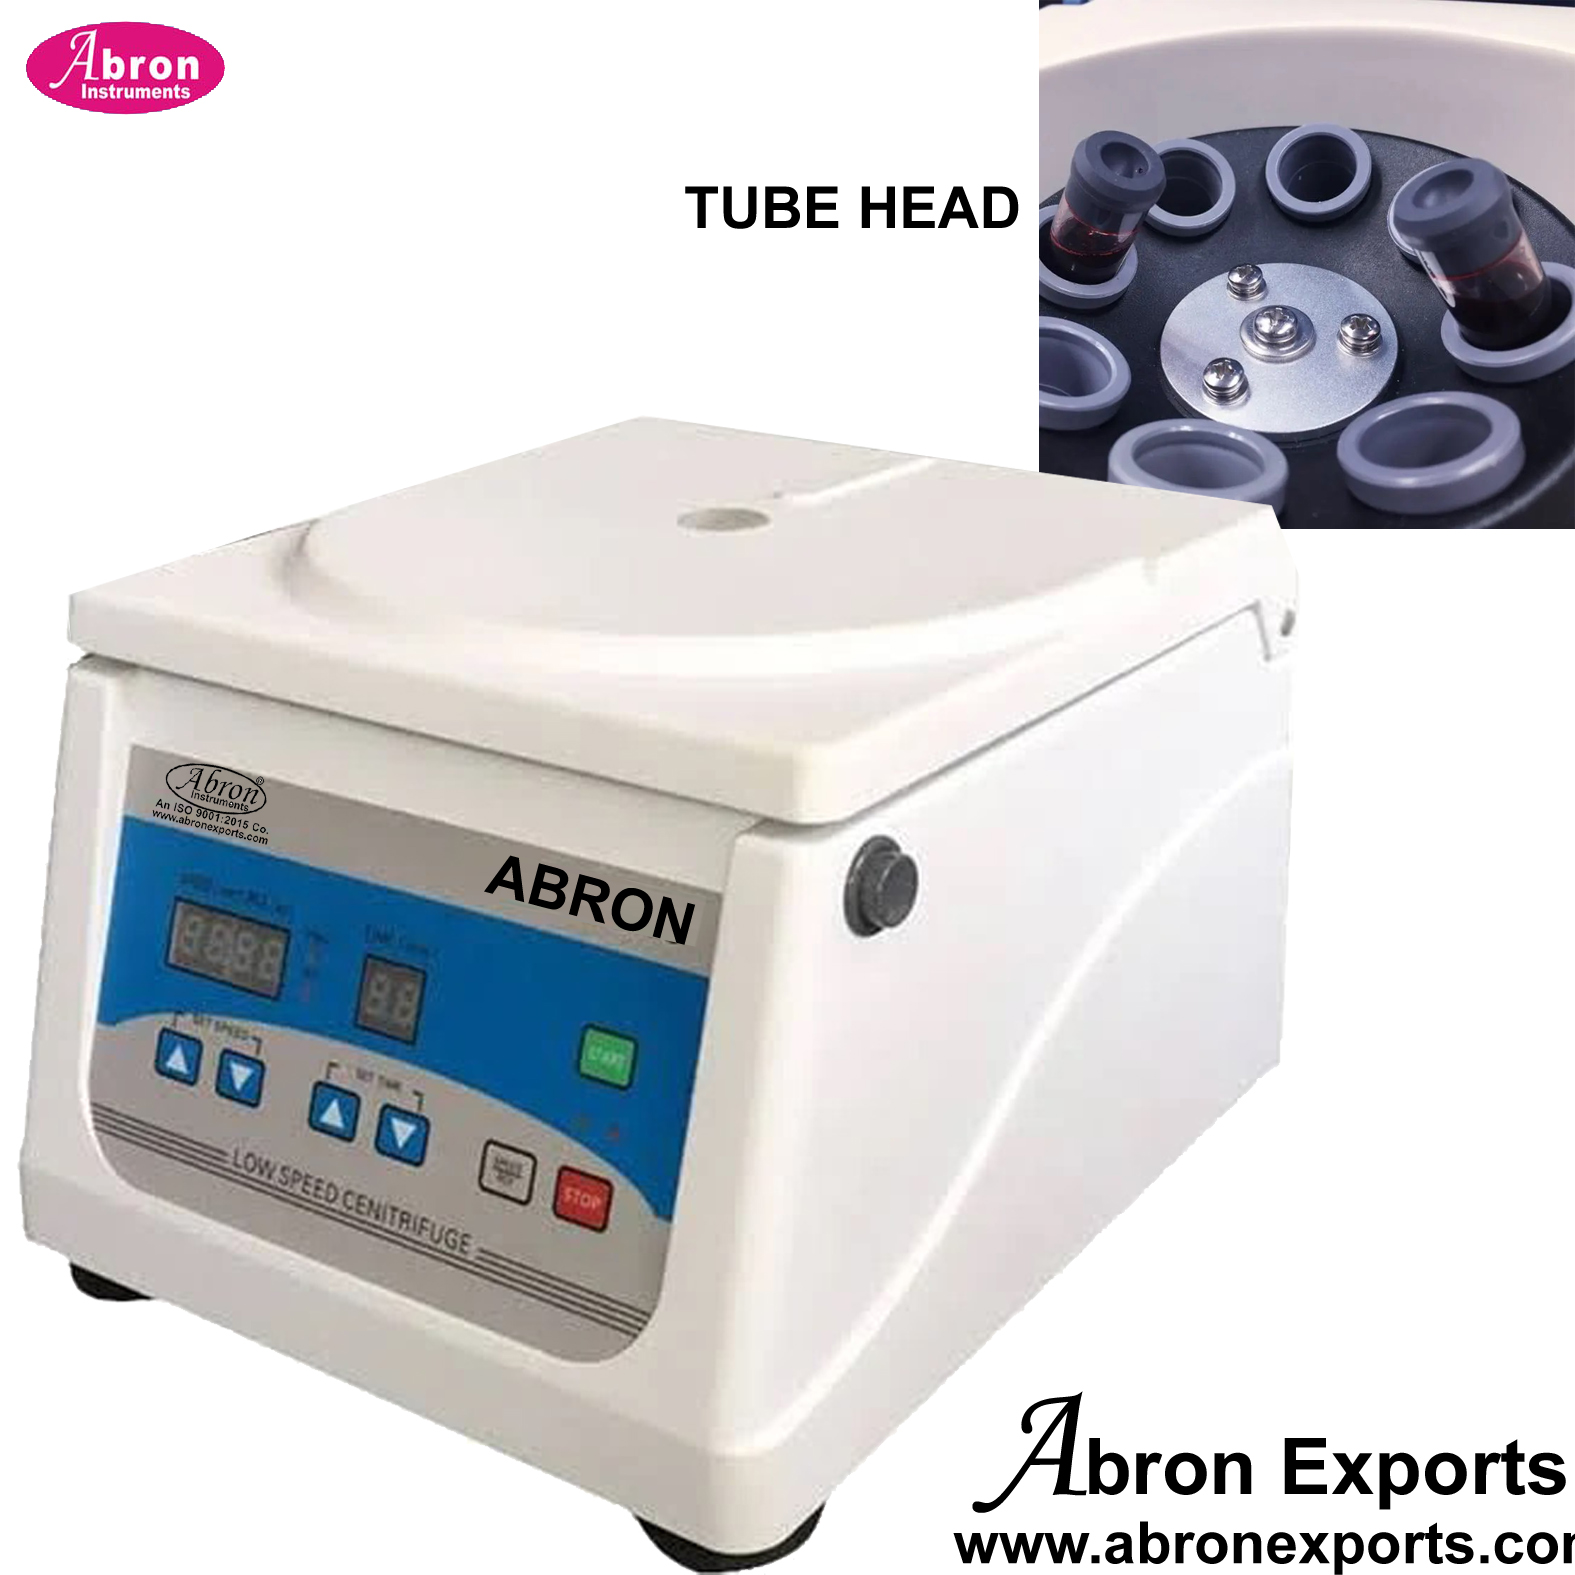 Centrifuge Blood Bank Digital With Speed Regulator for 1 pack of 200ml Electric Special CH Abron ABM-2692CH2 